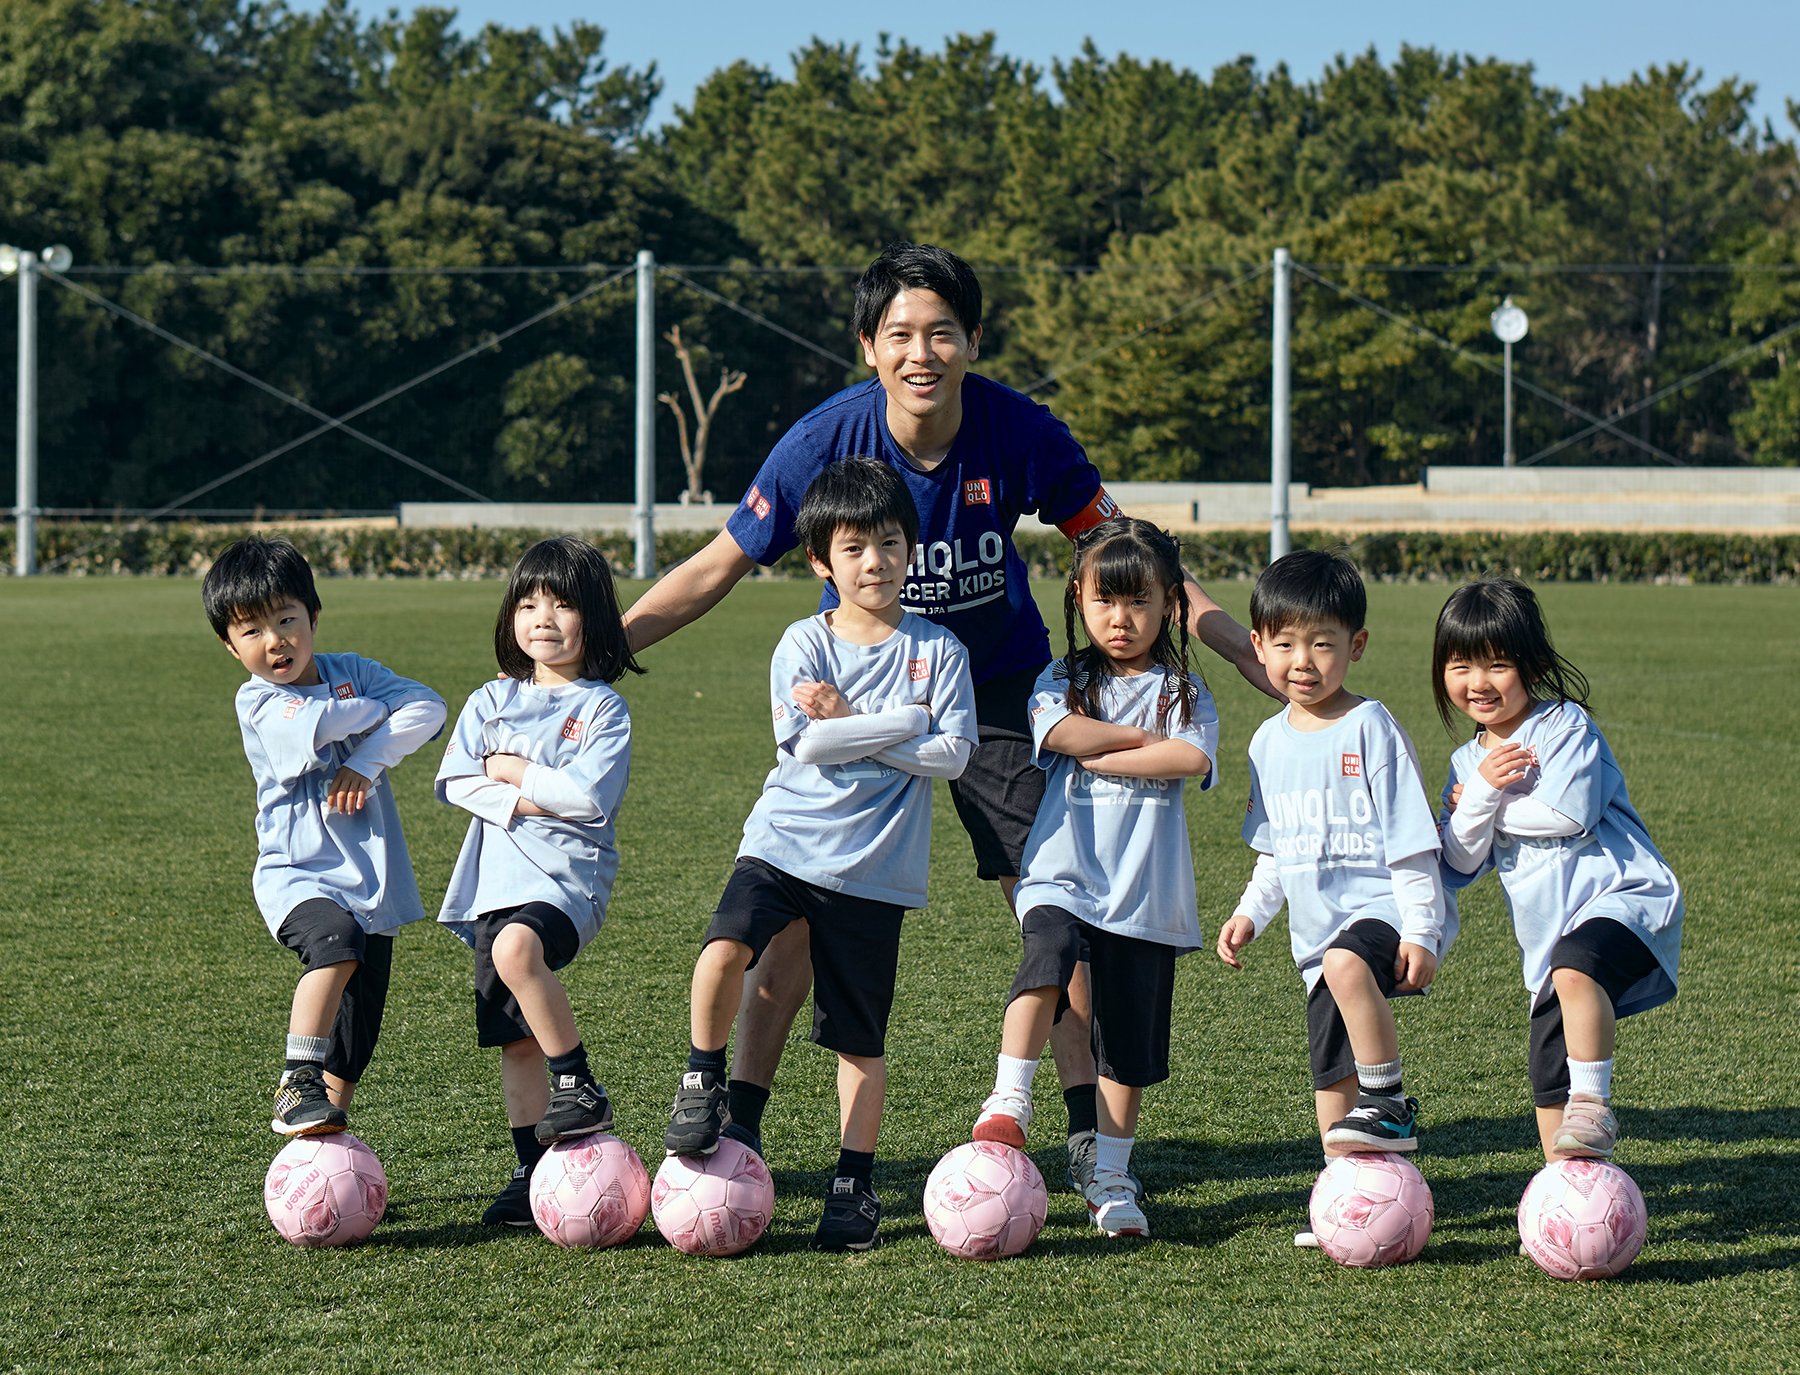 UNIQLO and Japan Football Association Team Up for JFA UNIQLO SOCCER KIDS in  Vietnam, in Hanoi and Ho Chi Minh - Event Celebrates 50th Anniversary of  Diplomatic Relations Between Japan and Vietnam